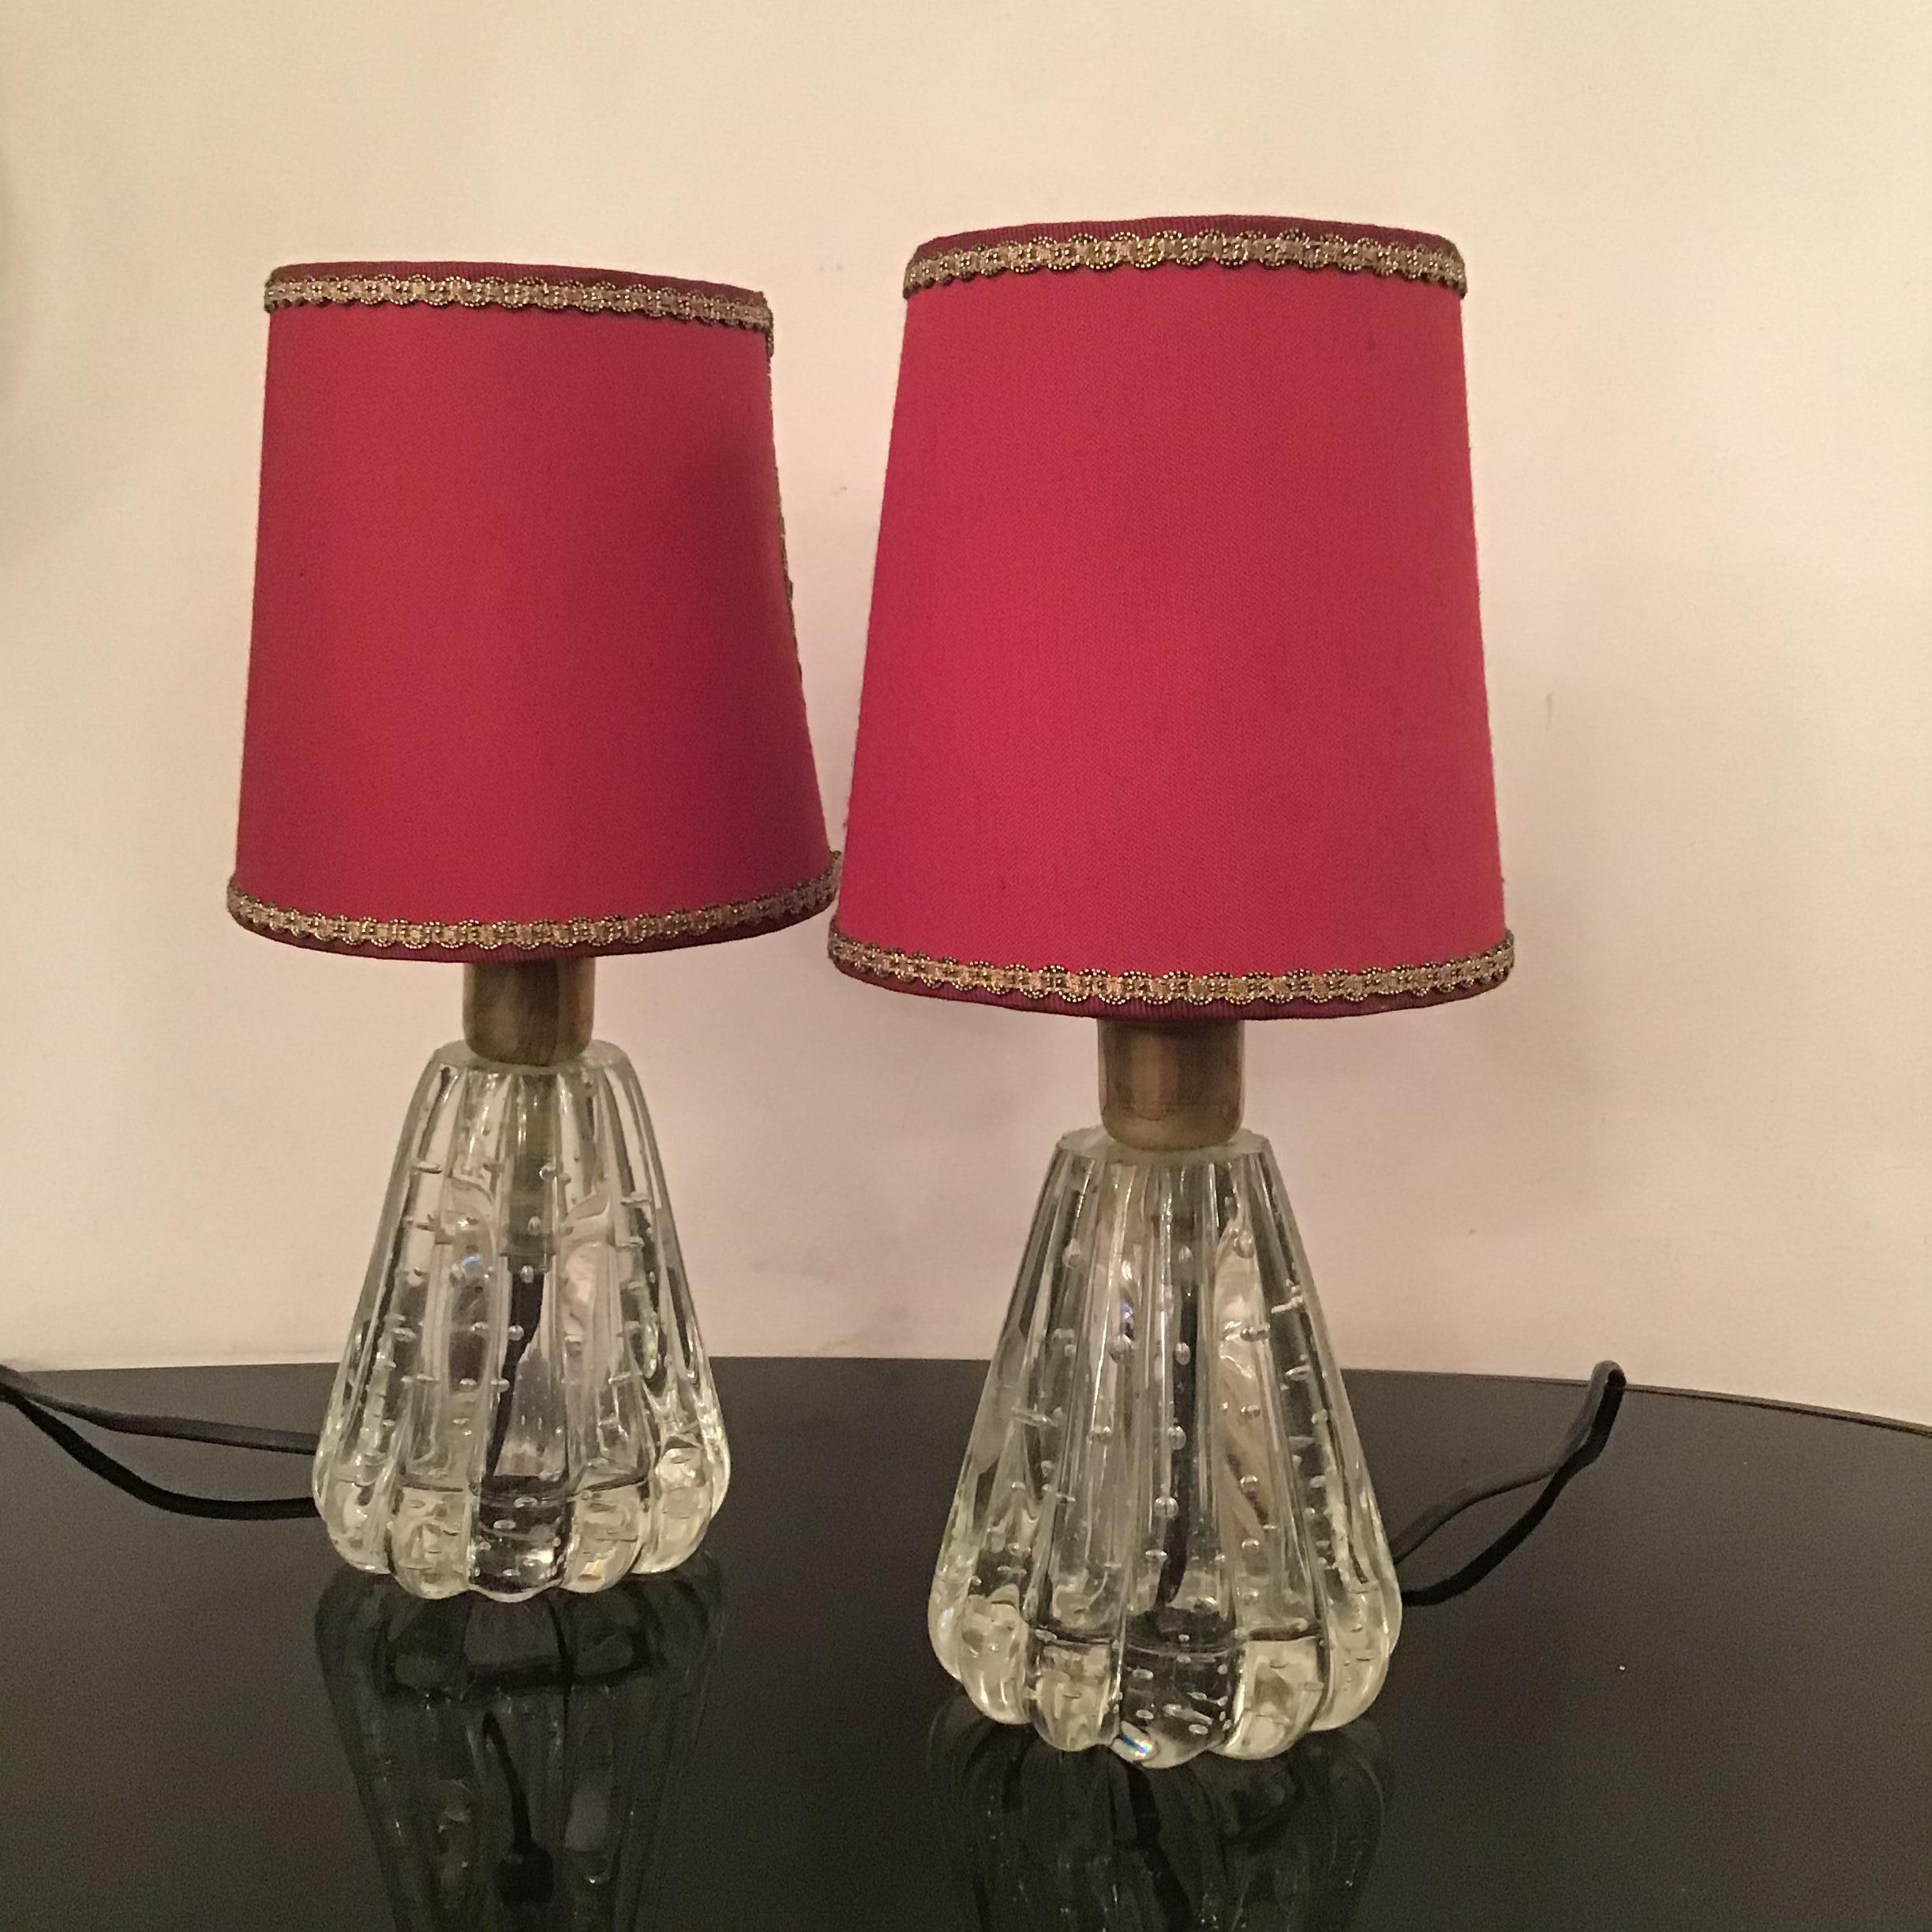 Barovier e Toso Table Lamps Murano Glass Brass Fabric Lampshade 1940 Italy For Sale 6